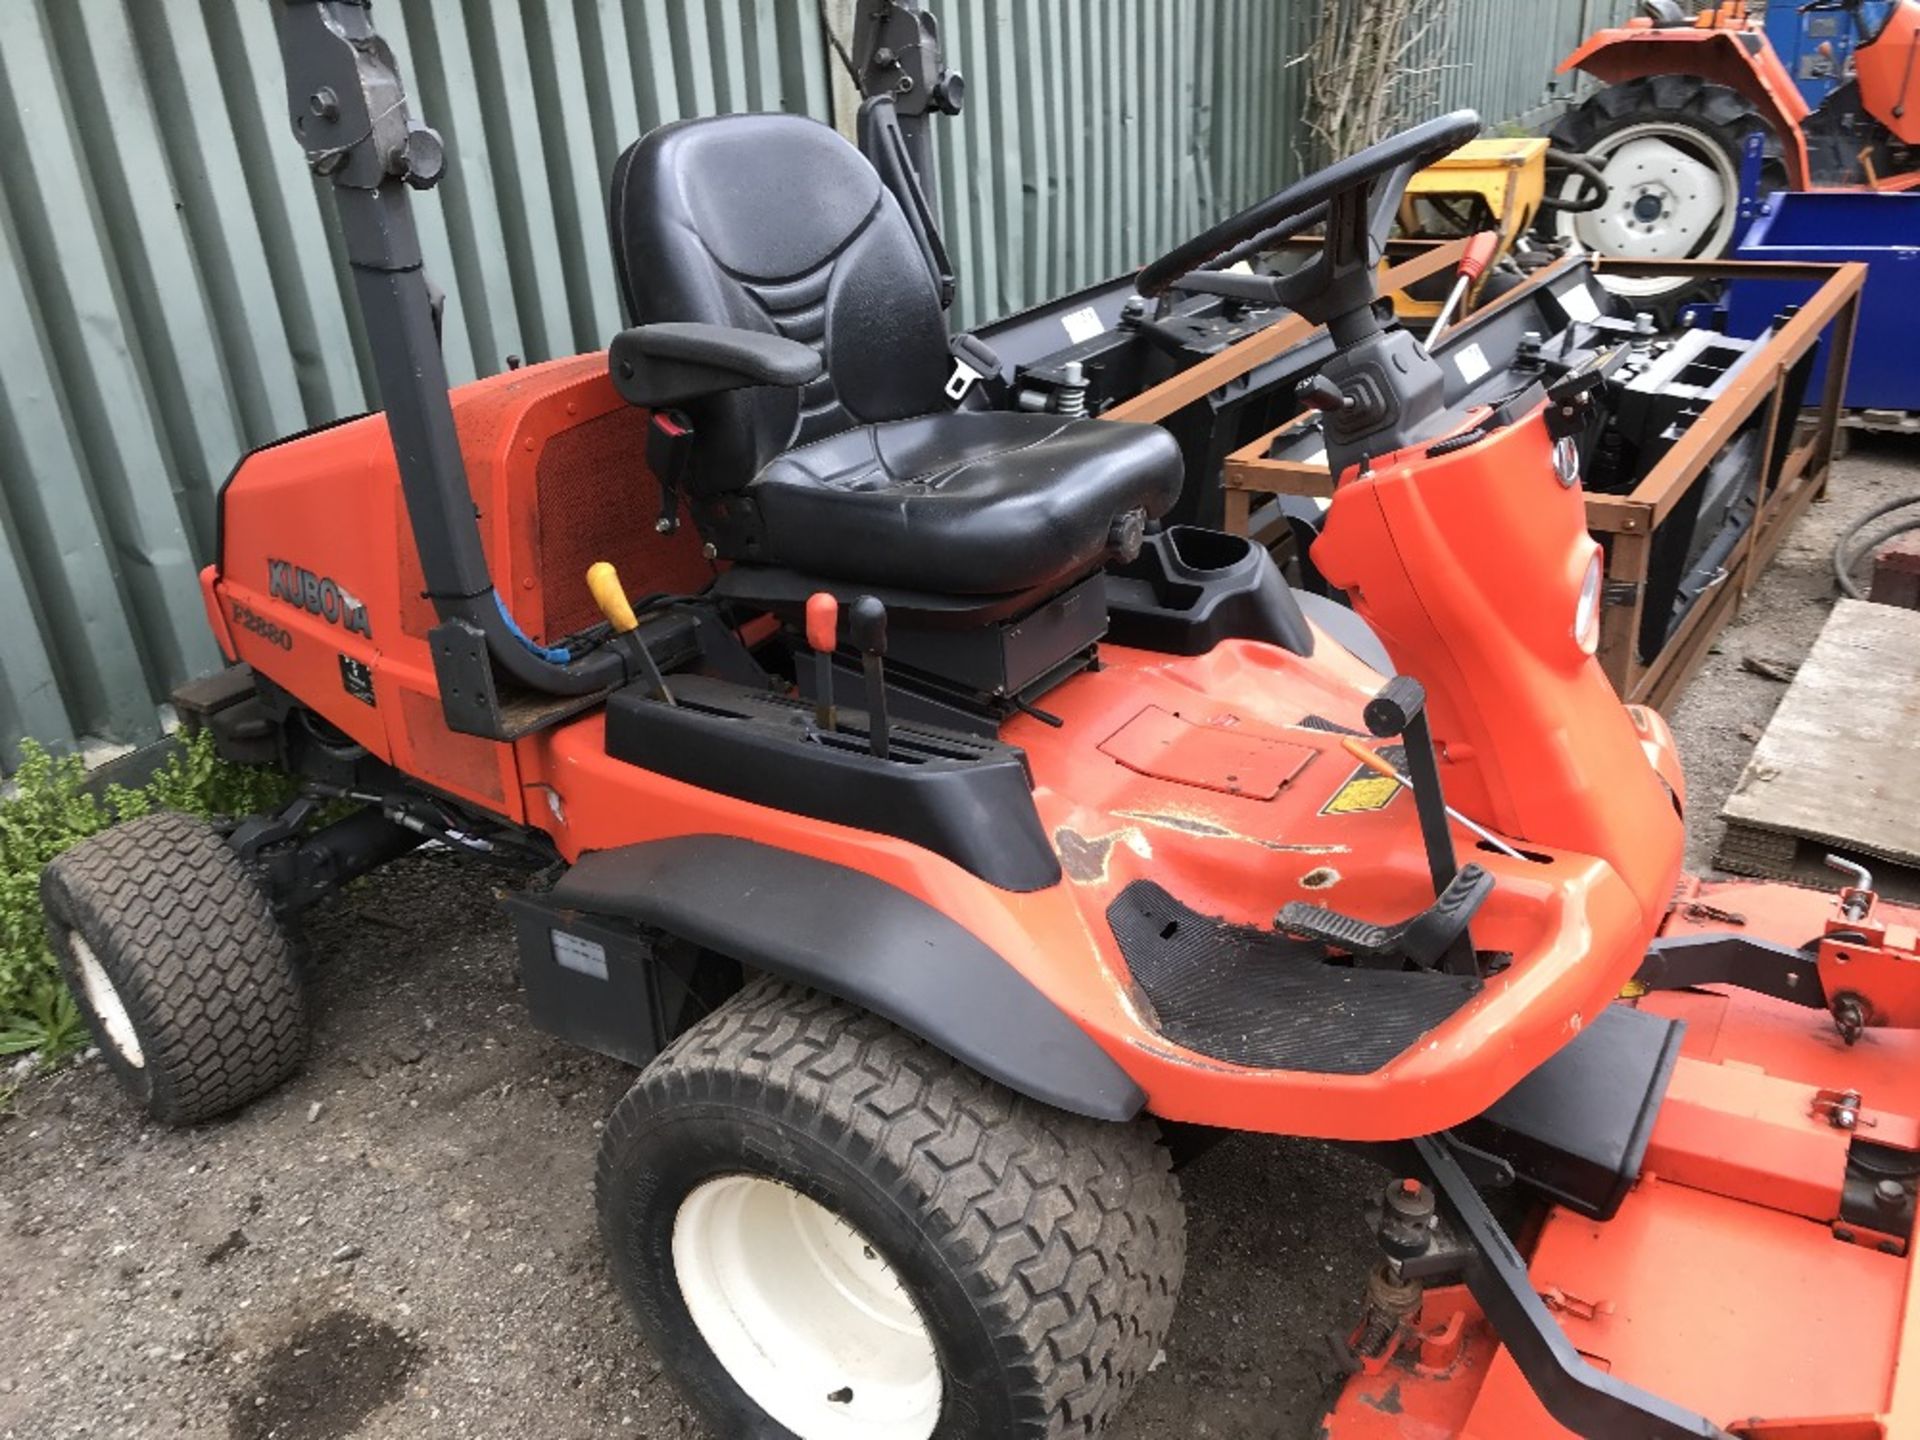 KUBOTA 2880 4WD OUTFRONT MOWER, 2670 REC.HRS. REG: SF14 HXM, V5 TO FOLLOW when tested was seen to - Bild 2 aus 3